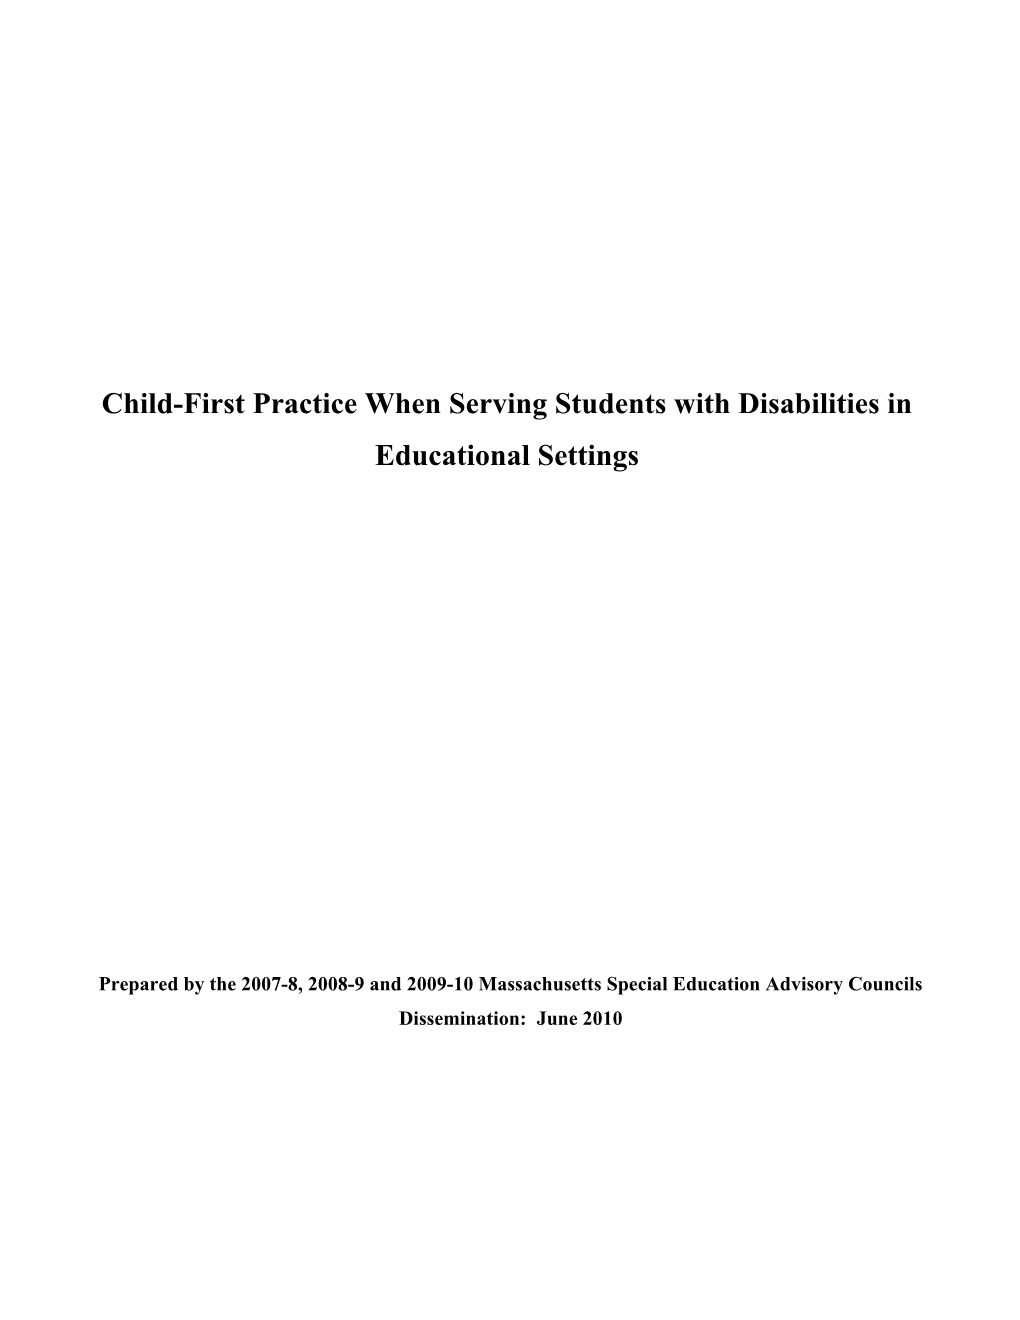 Child-First Practice When Serving Students with Disabilities